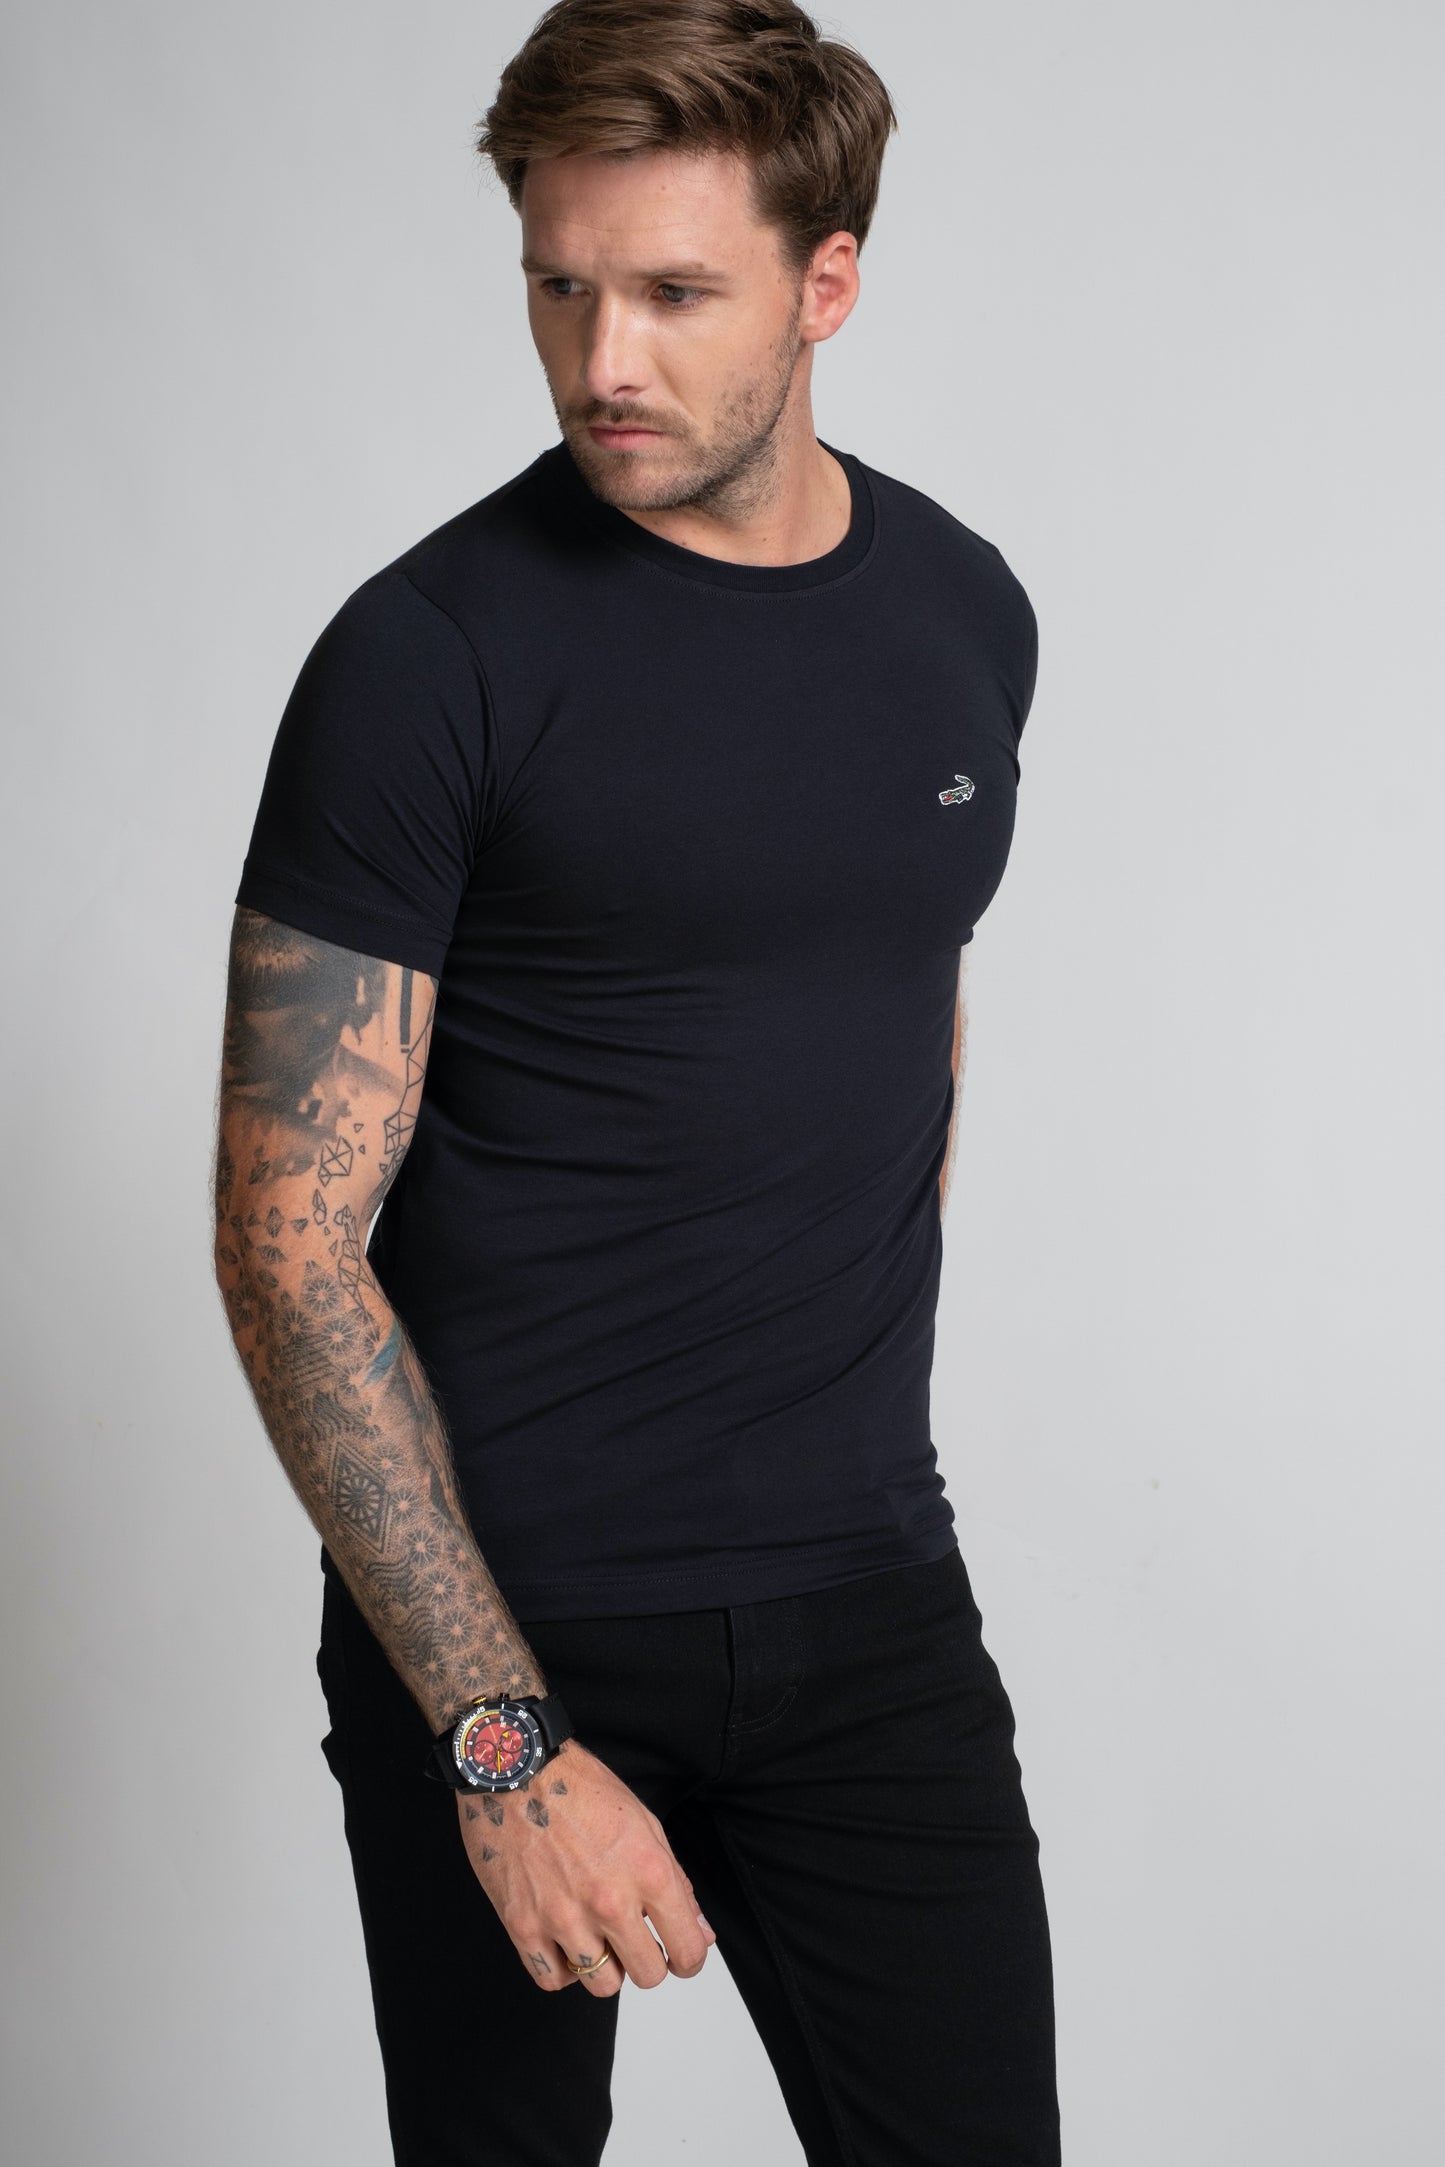 Action Fit Short sleeves-CasualCrew Neck - Black Inck